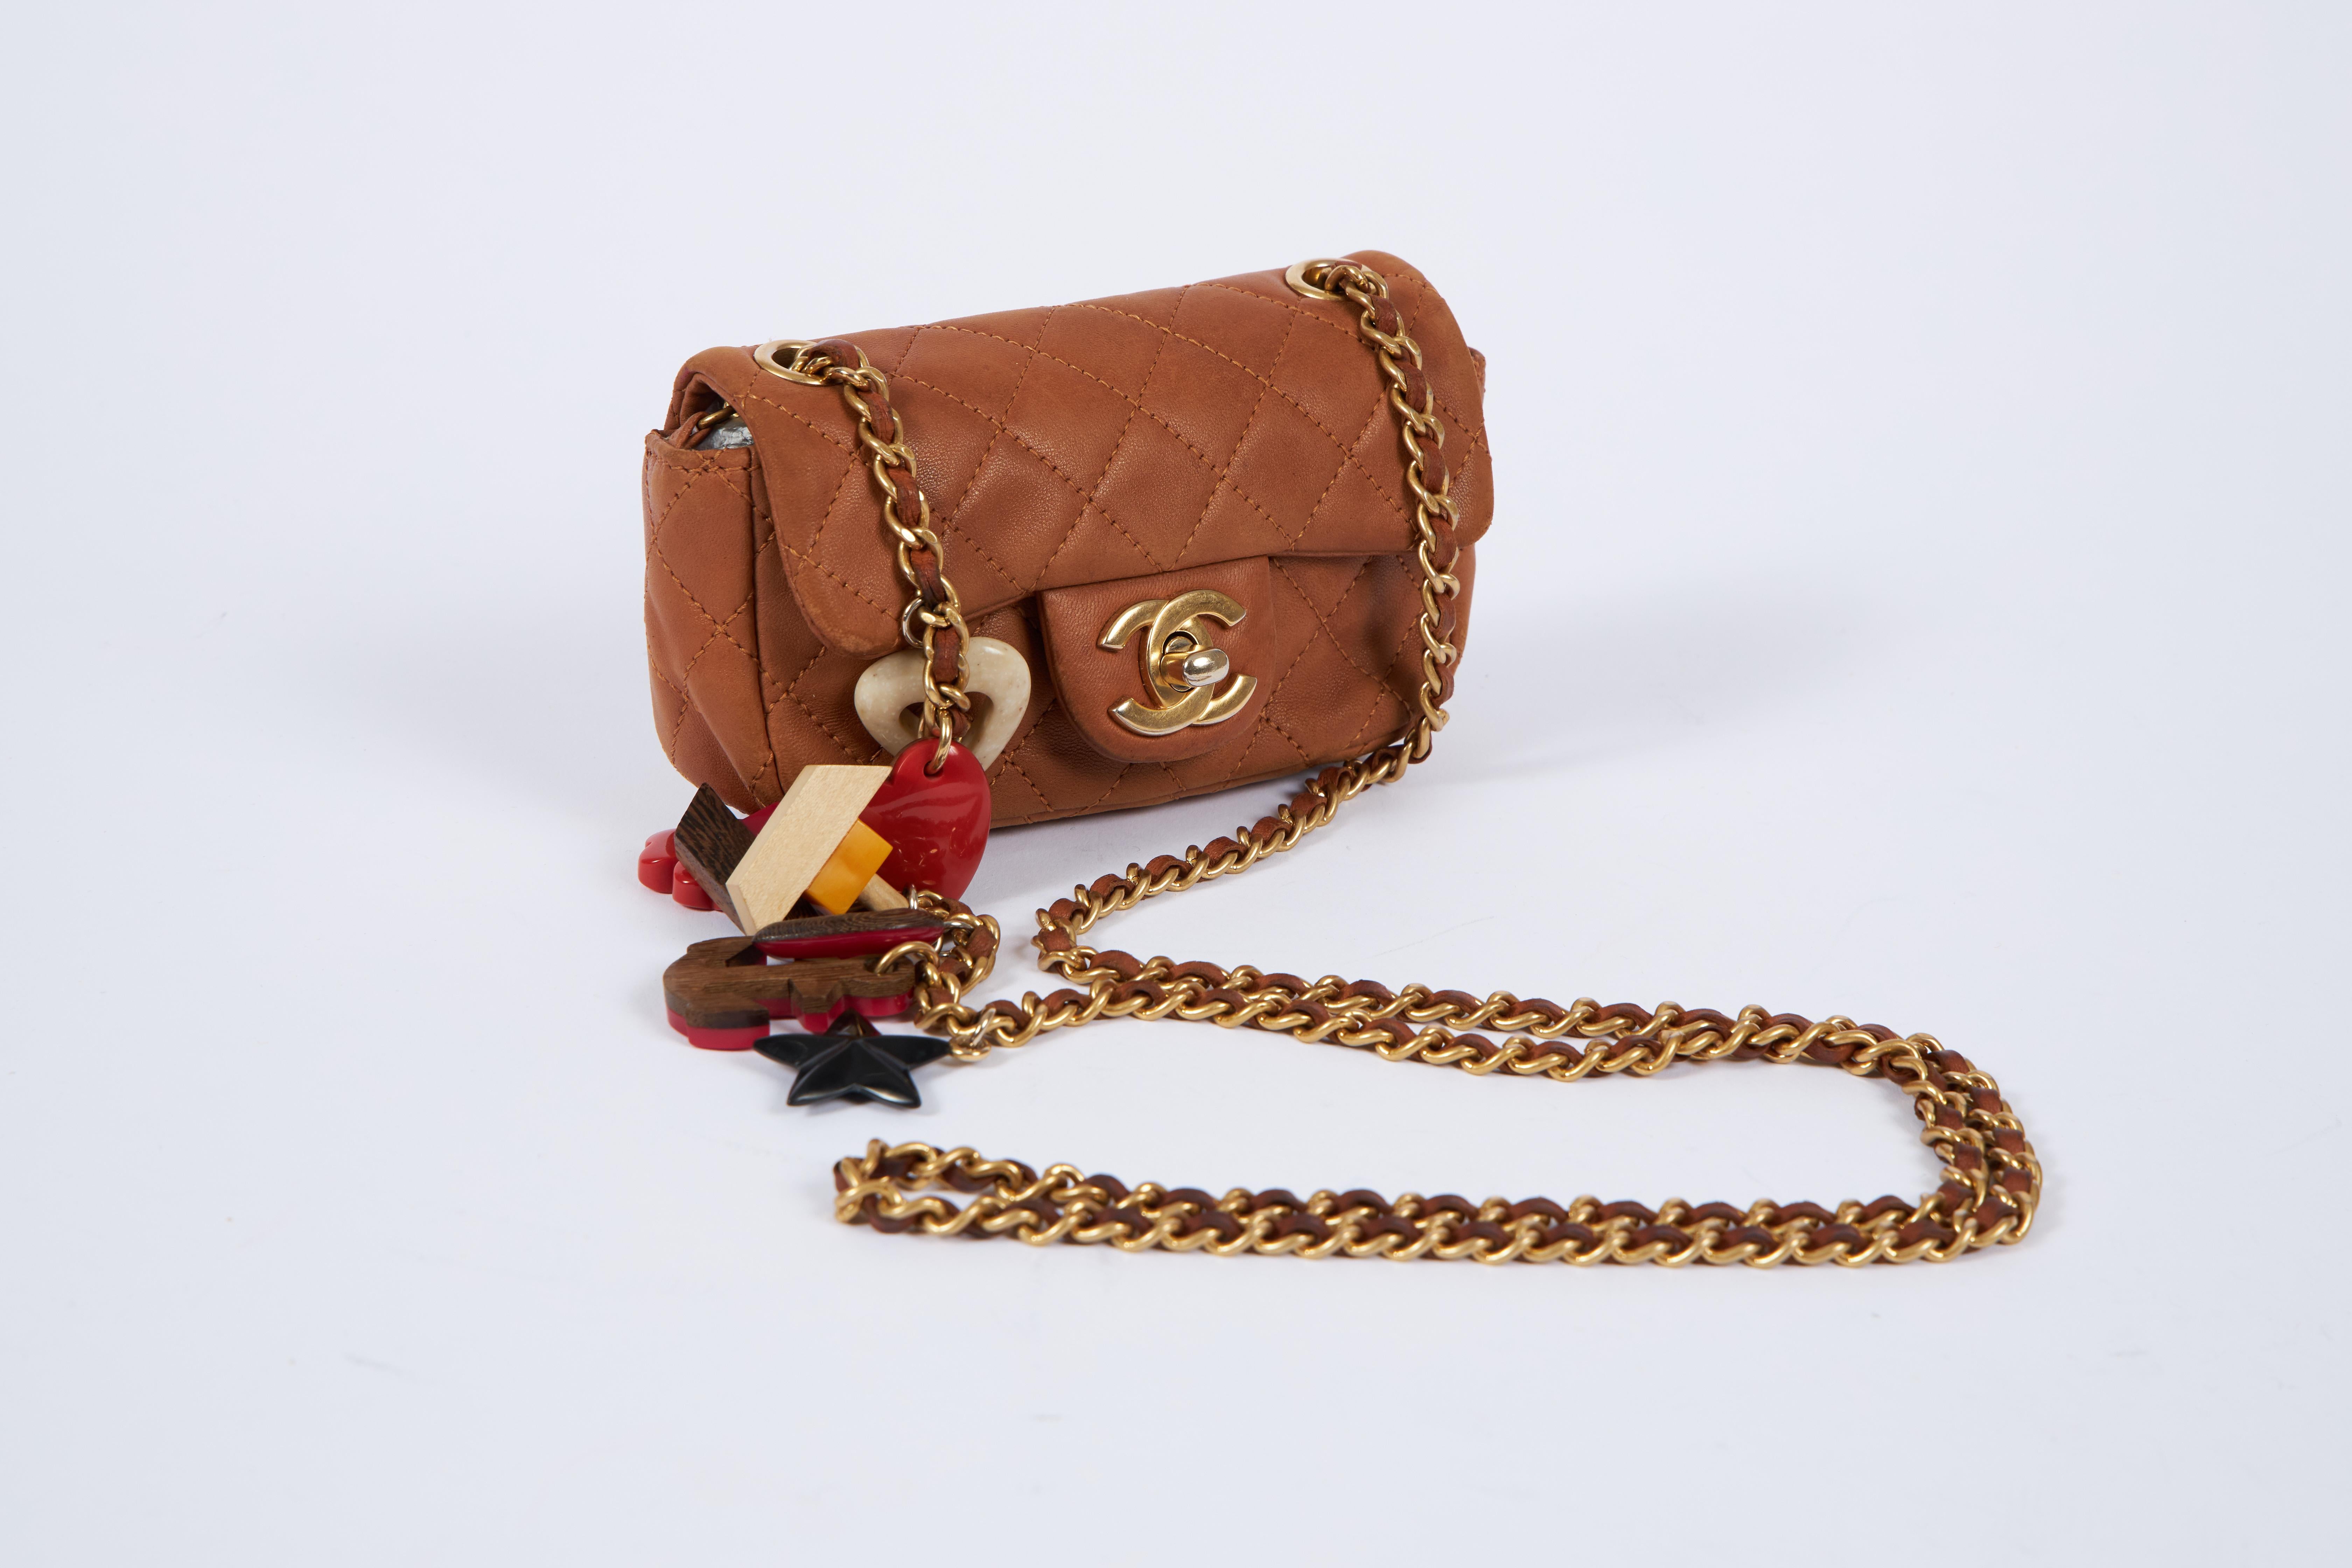 Chanel limited edition mini classic charm bag. Camel brown leather with gold tone hardware. Shoulder strap 23